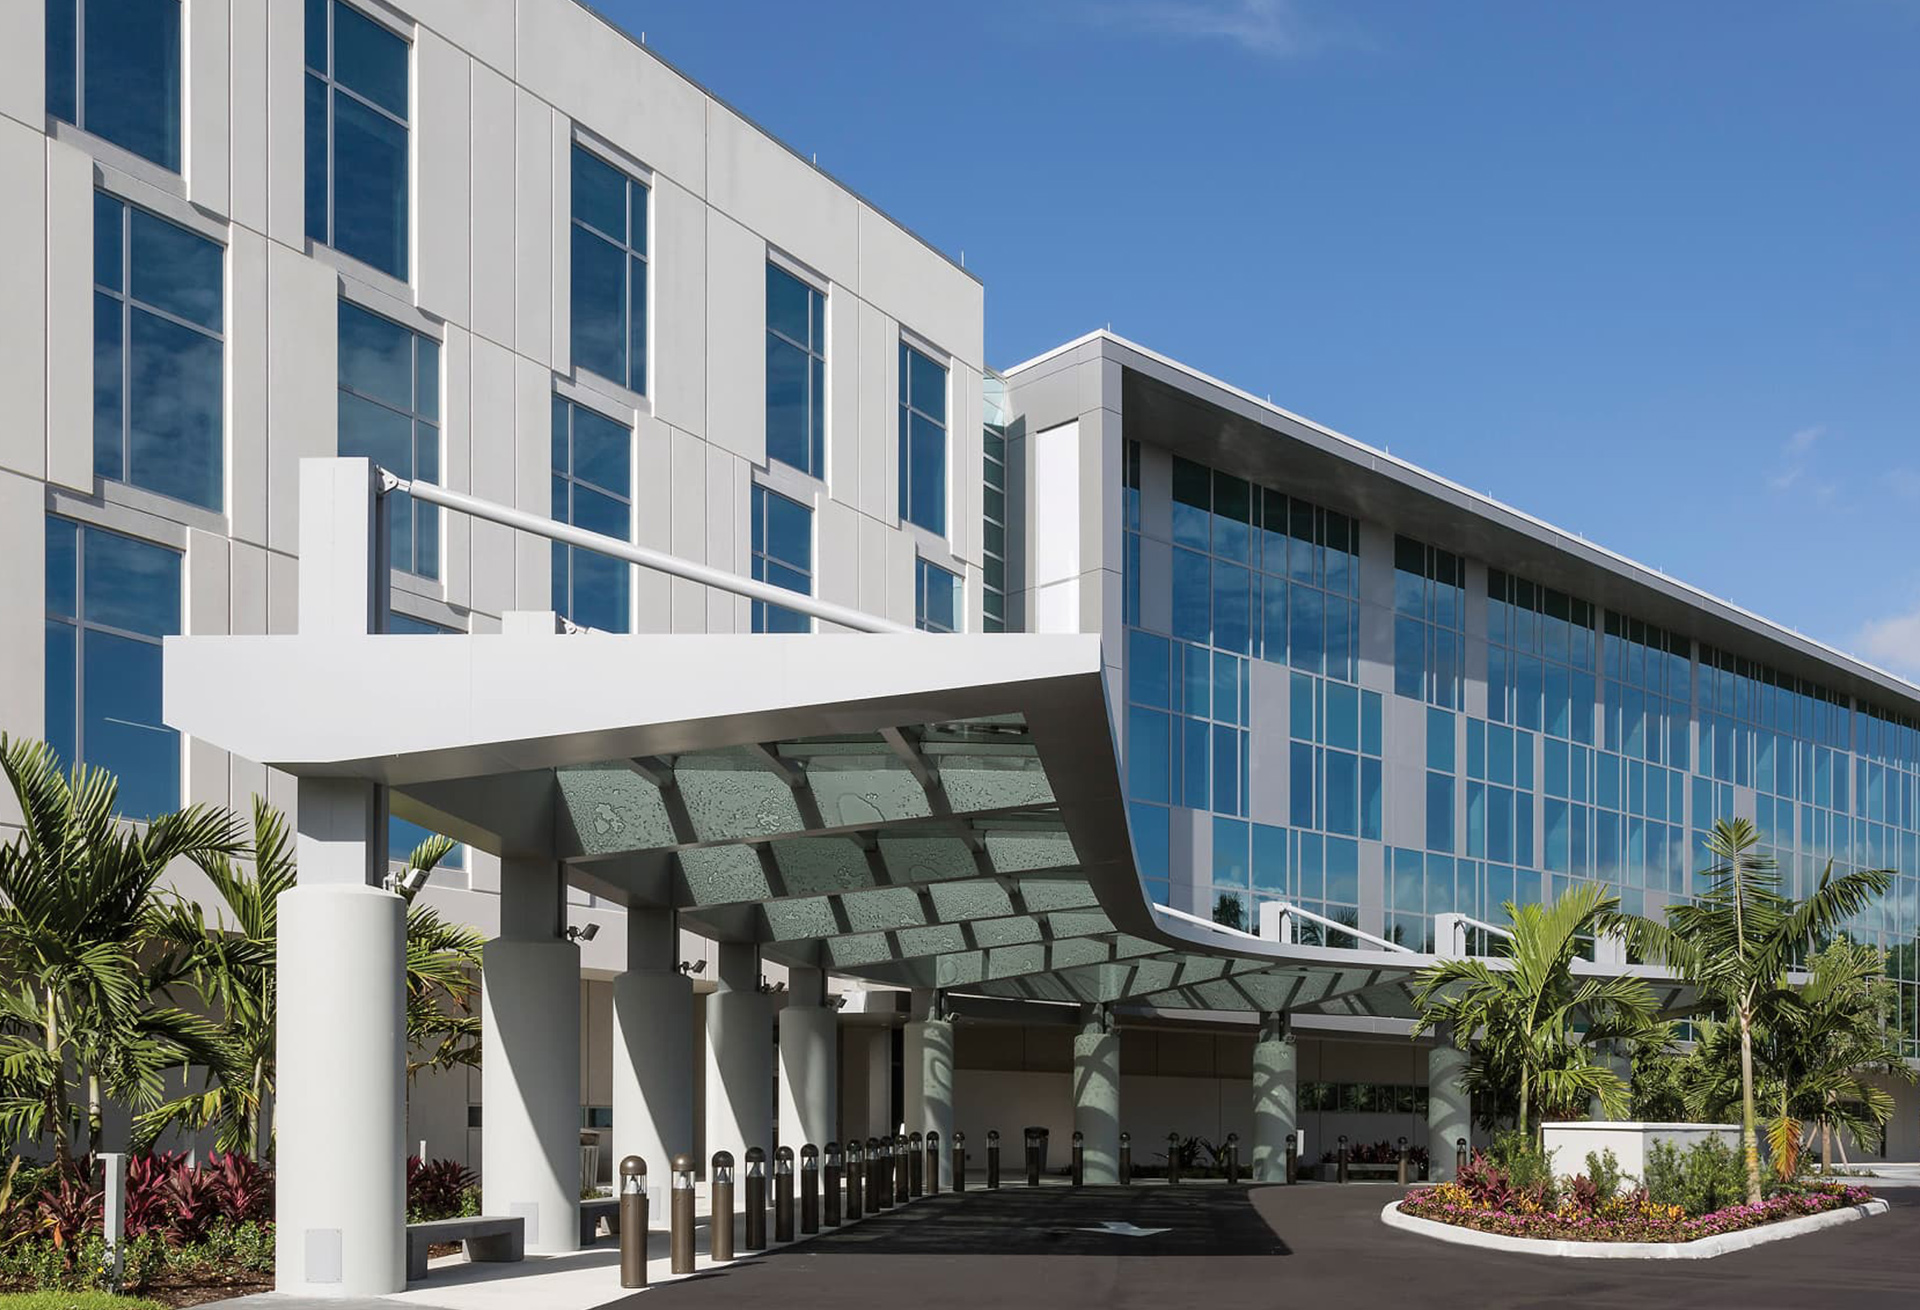 Delray Medical Center by Holland Engineering